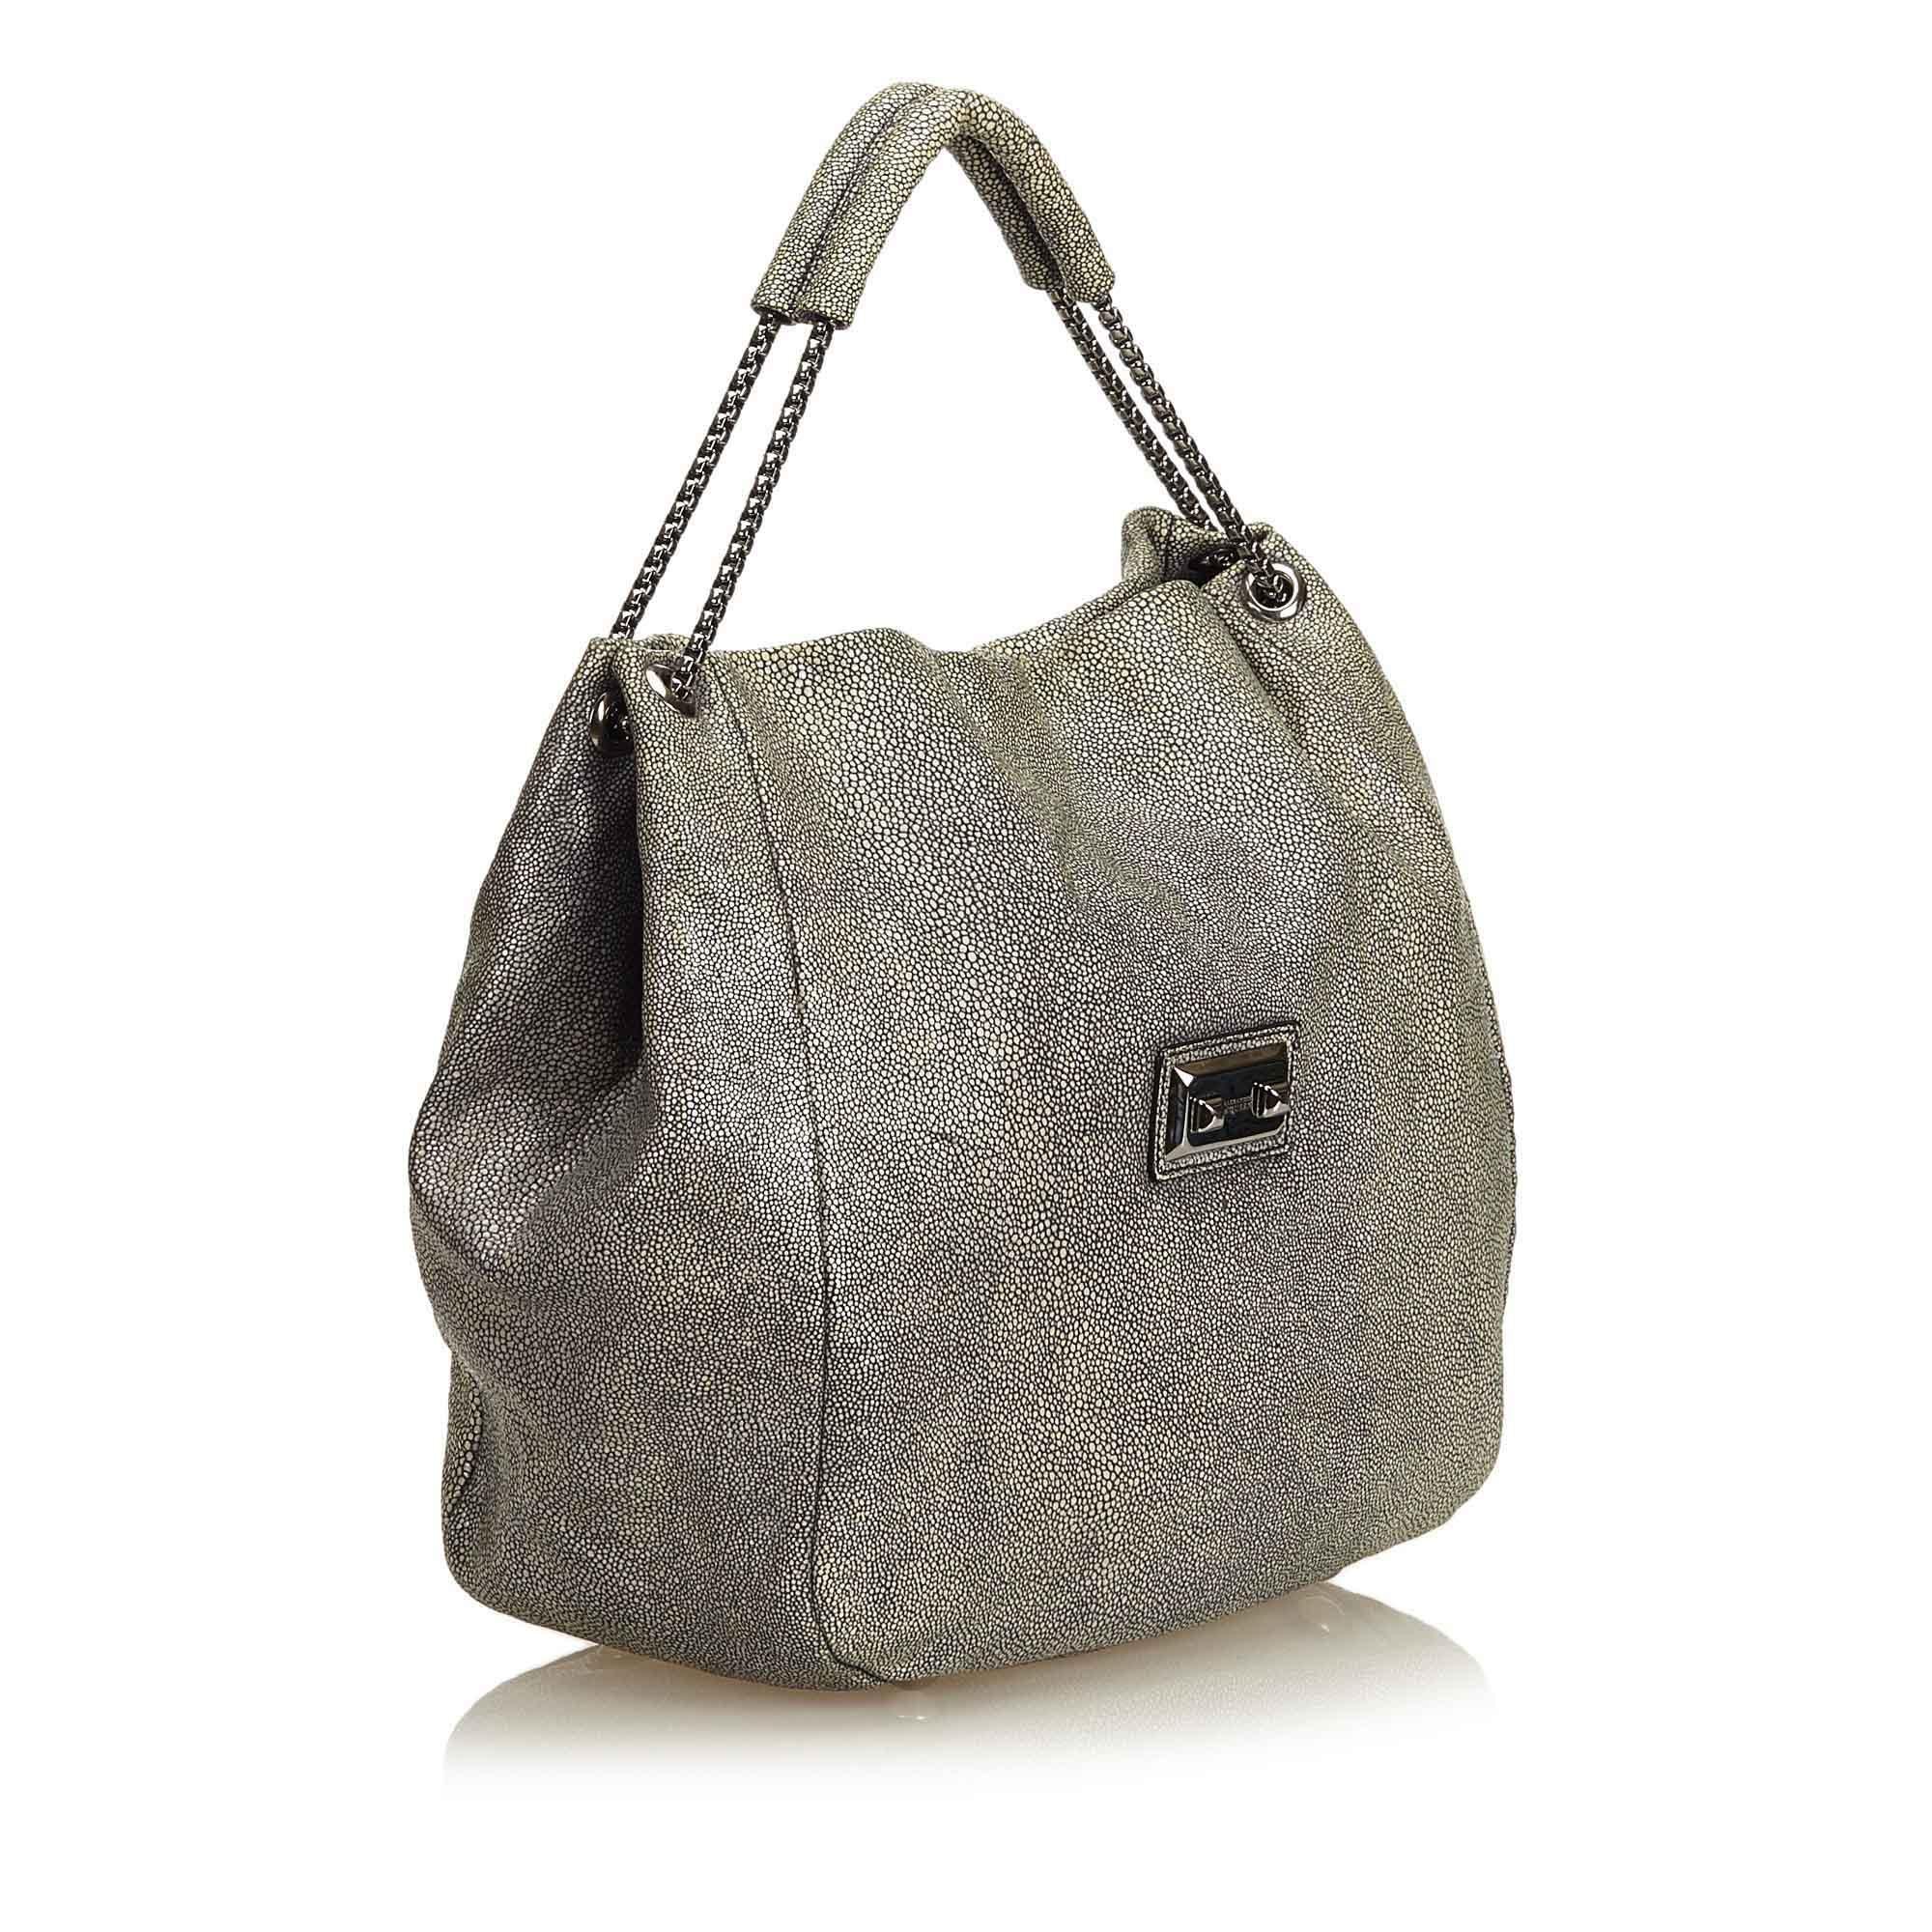 This hoboh bag features a textured leather body, silver tone chain straps, open top, and interior slip pocket. It carries as B+ condition rating.

Inclusions: 
Dust Bag

Dimensions:
Length: 35.00 cm
Width: 42.00 cm
Depth: 16.00 cm
Hand Drop: 12.00